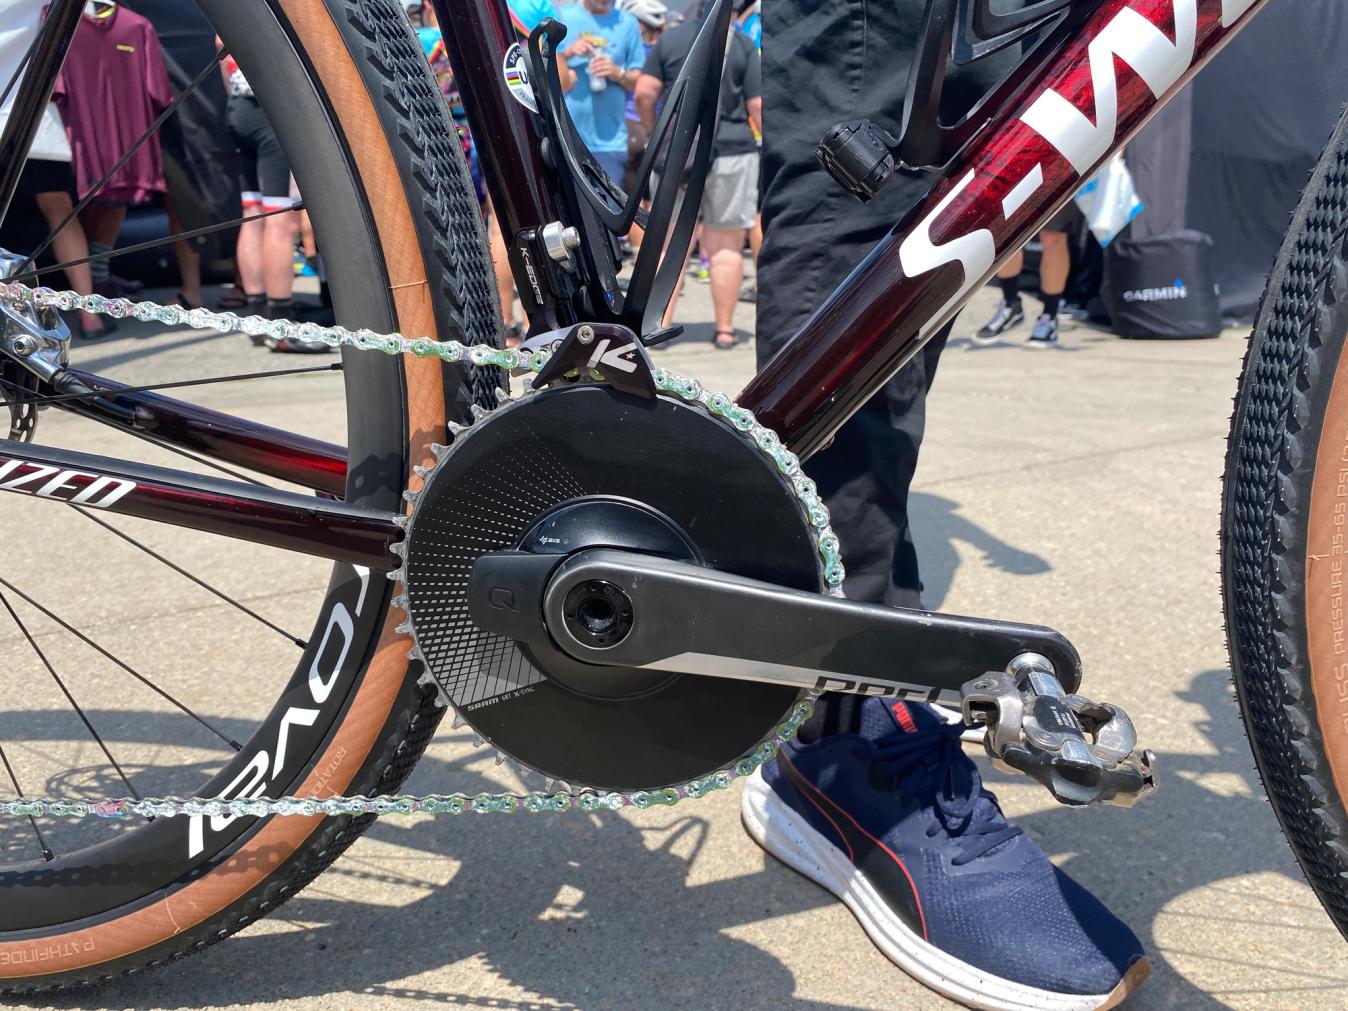 A waxed SRAM XX1 chain to go with a 48t chainring for the rollers of the Flint Hills. Most the contenders on the men's side who ran SRAM had the same 48t 1x setup. In the past riders have pushed the gearing up to 50t, but with some steep pitches at the tail end of the race a 48t is a safer bet